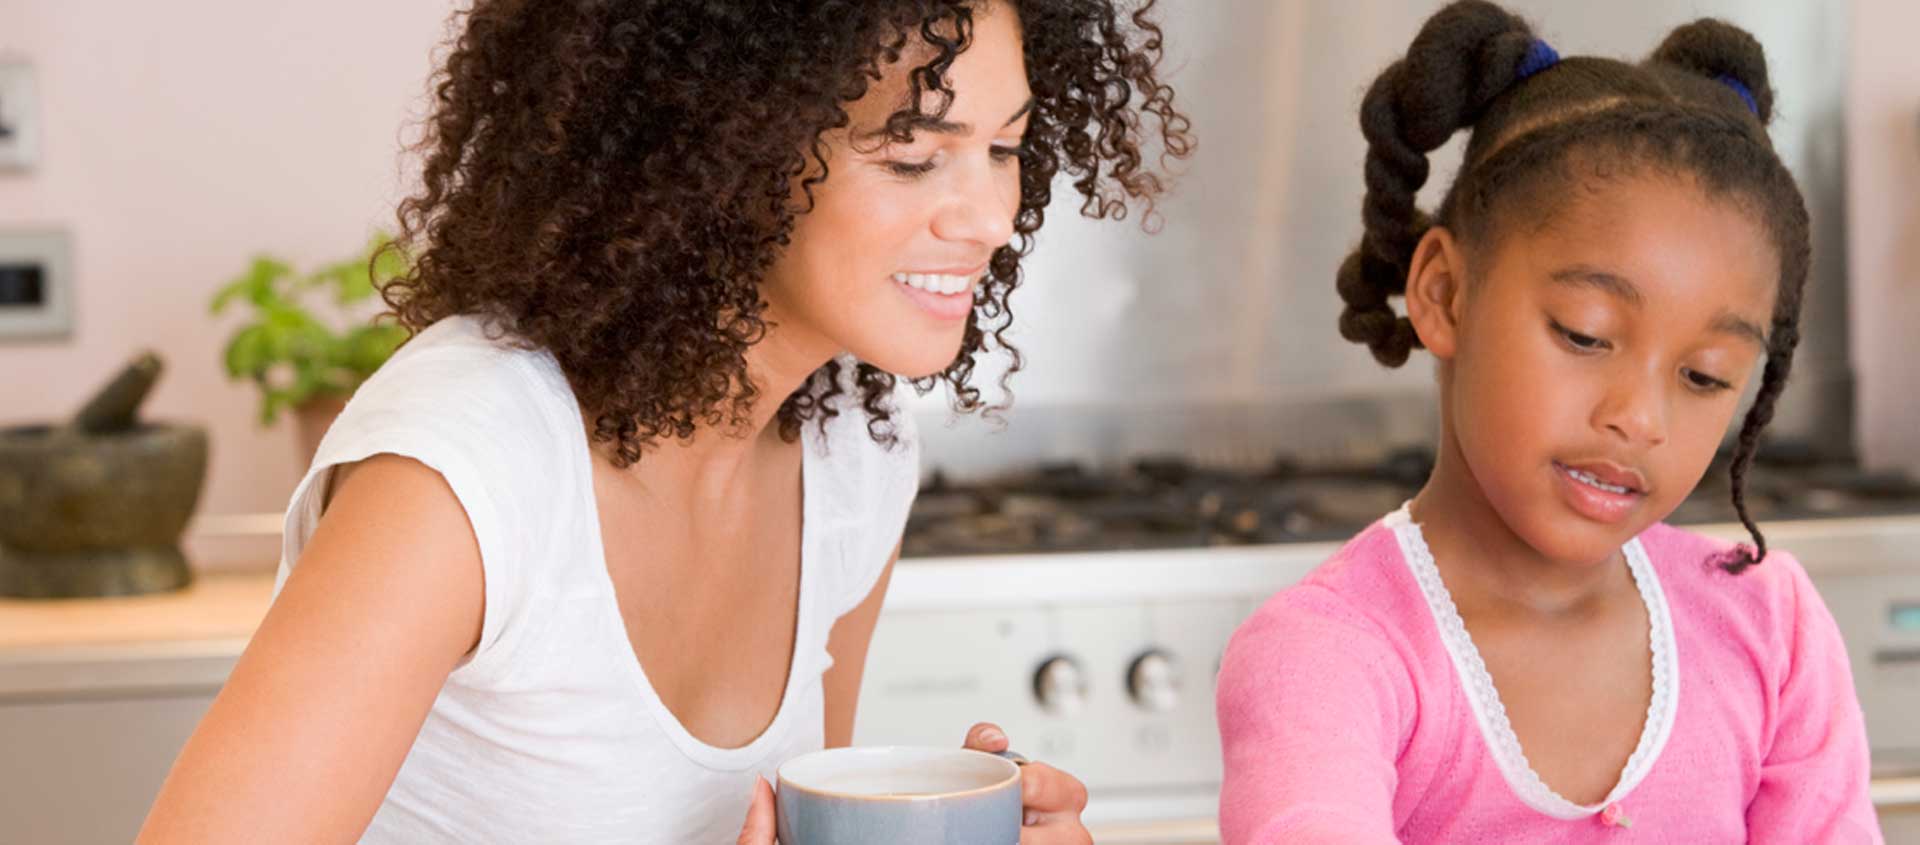 A smiling Black American mother and daughter together at a kitchen table.